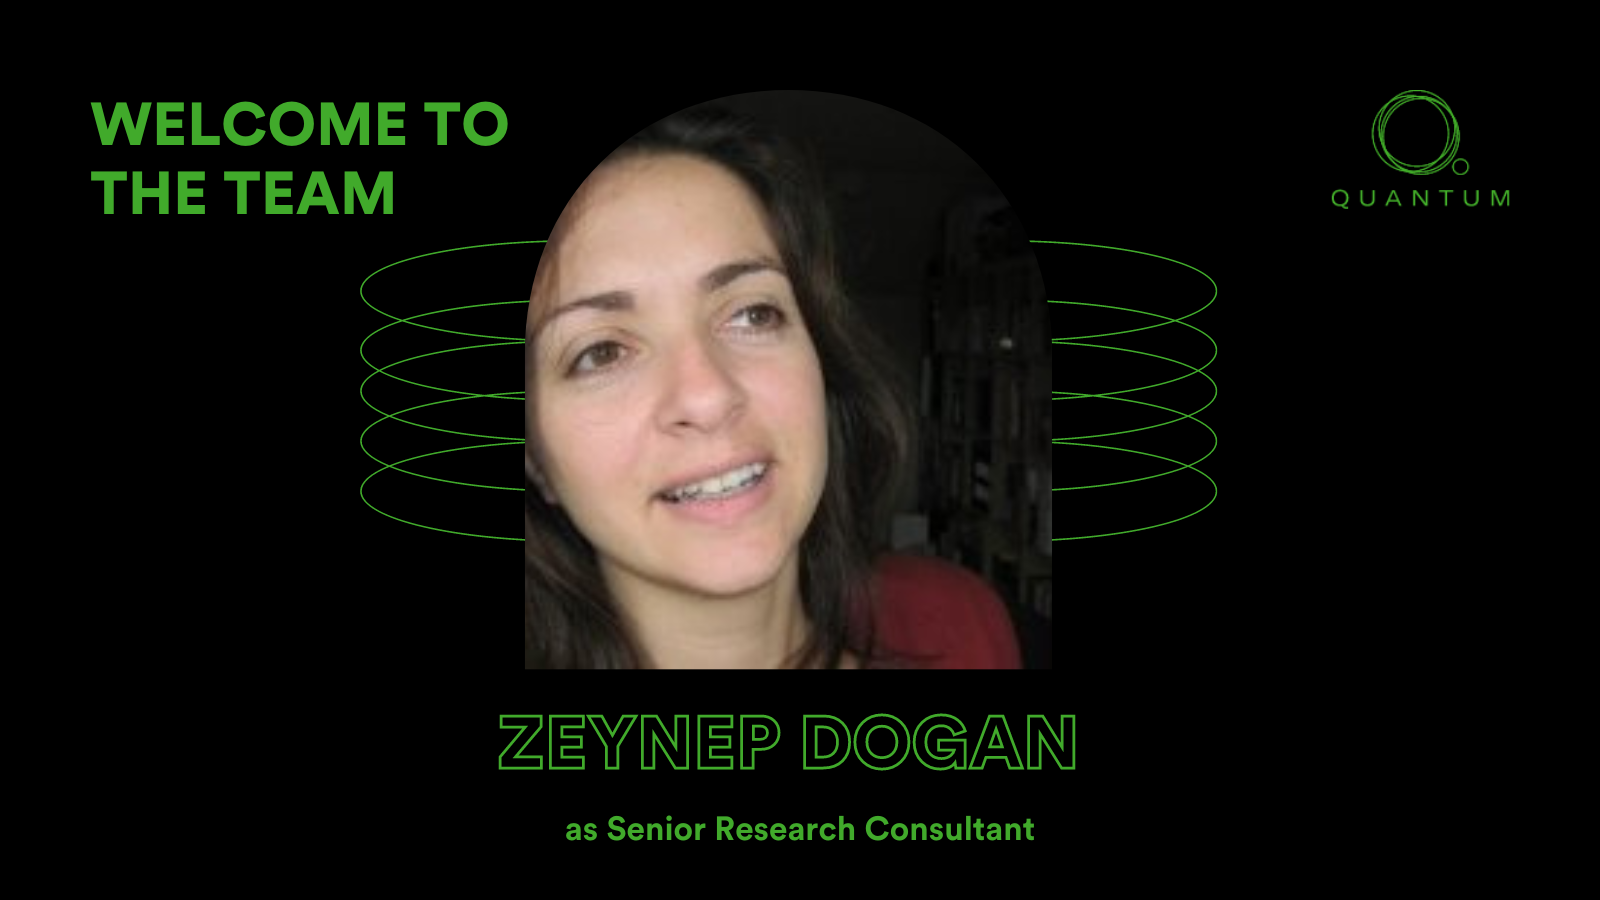 Welcome to the team - Zeynep Dogan